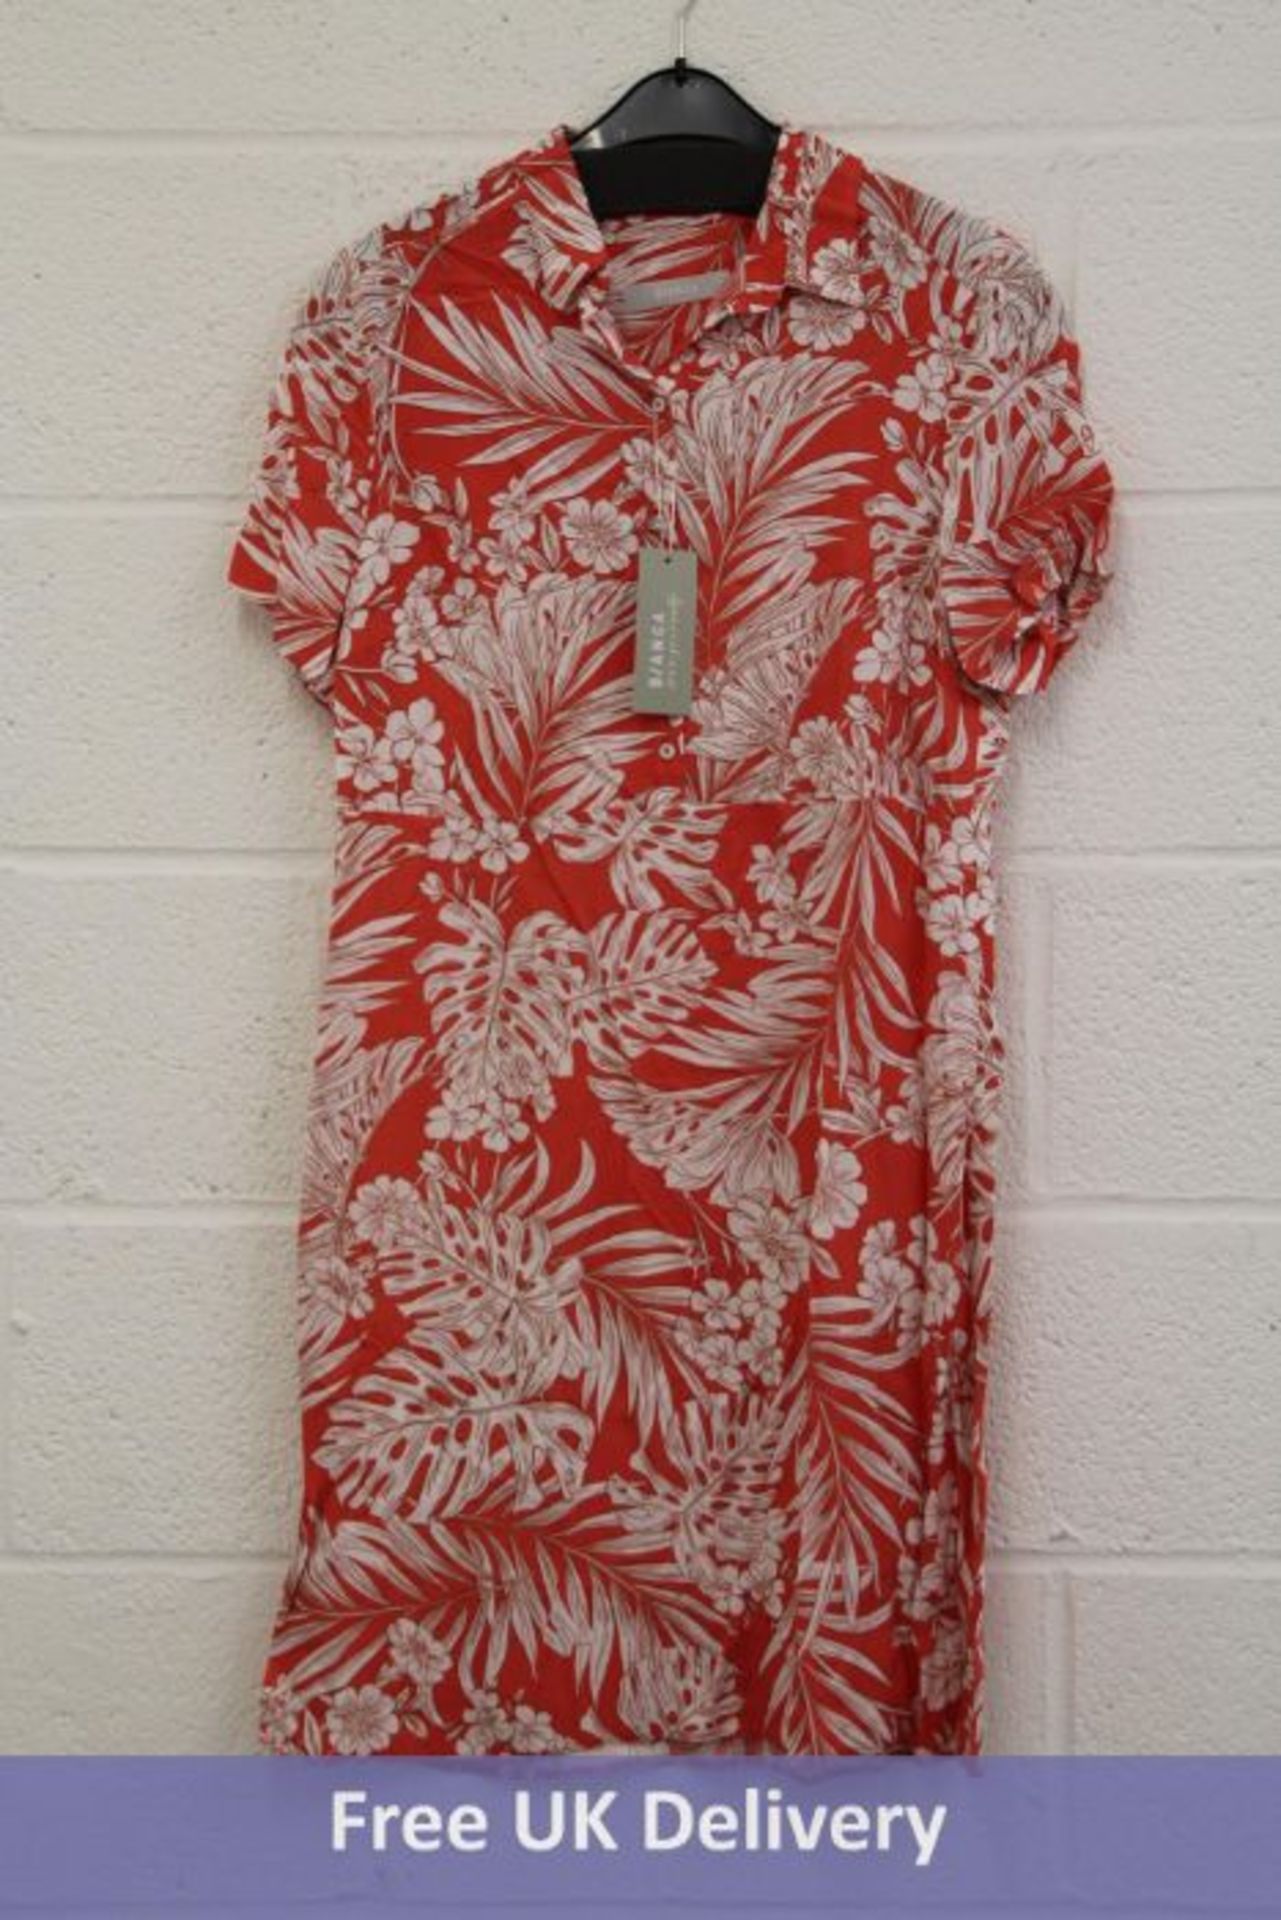 Jarrold And Sons Women's Clothing to include 1x Bianca, Dorine Short Sleeved Floral Dress, Red/White - Image 2 of 2